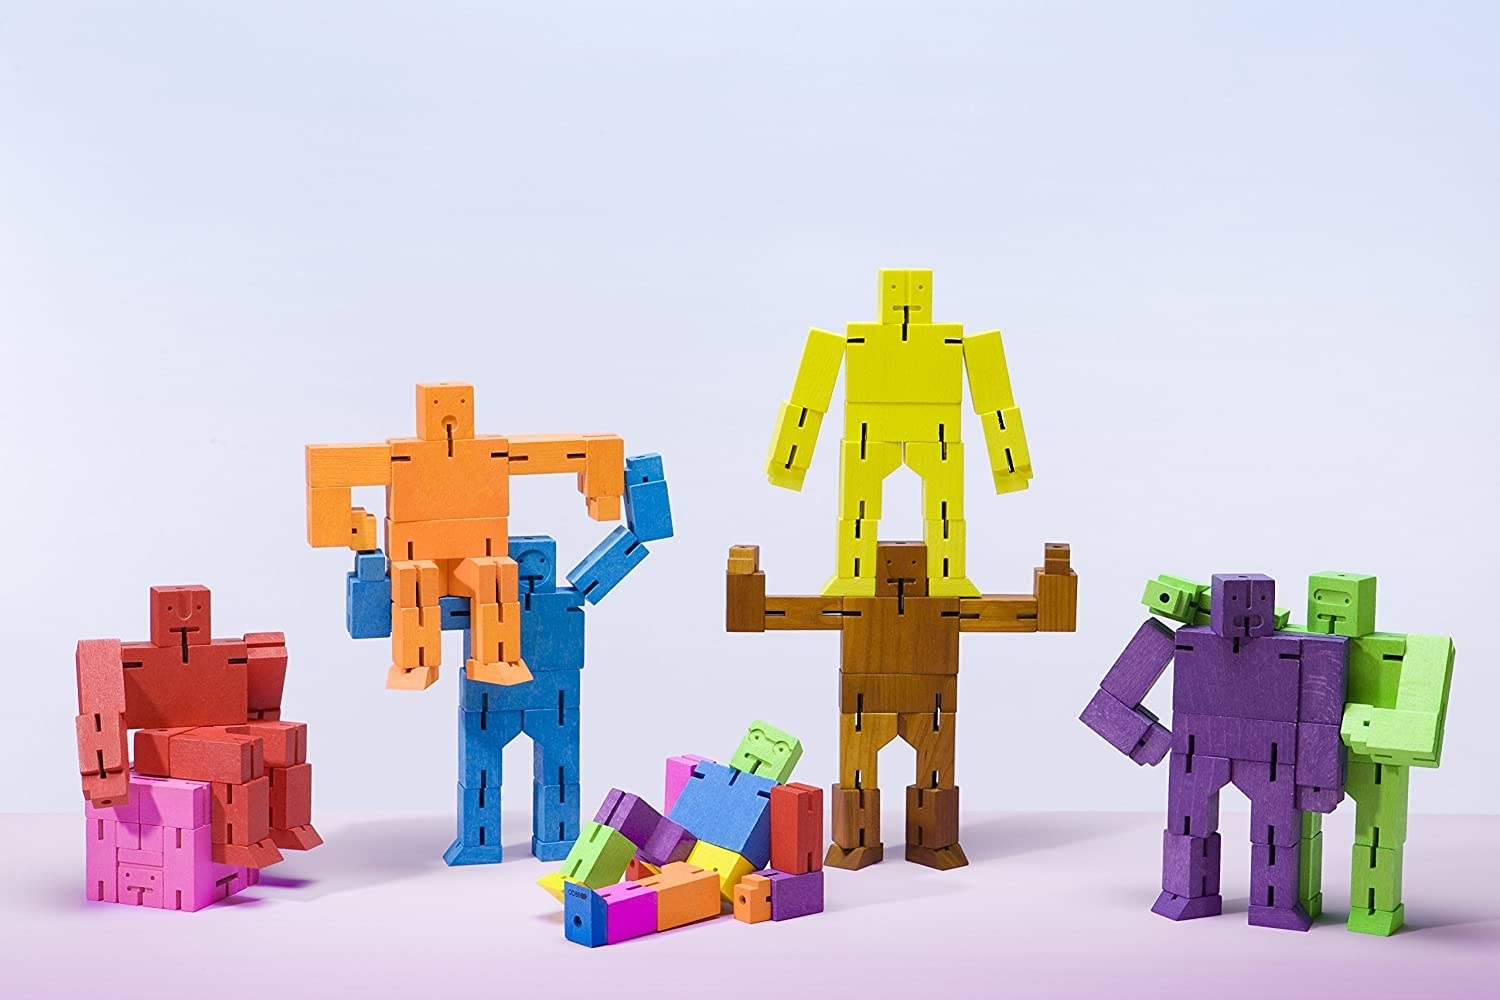 several cubebots in different colors and positions